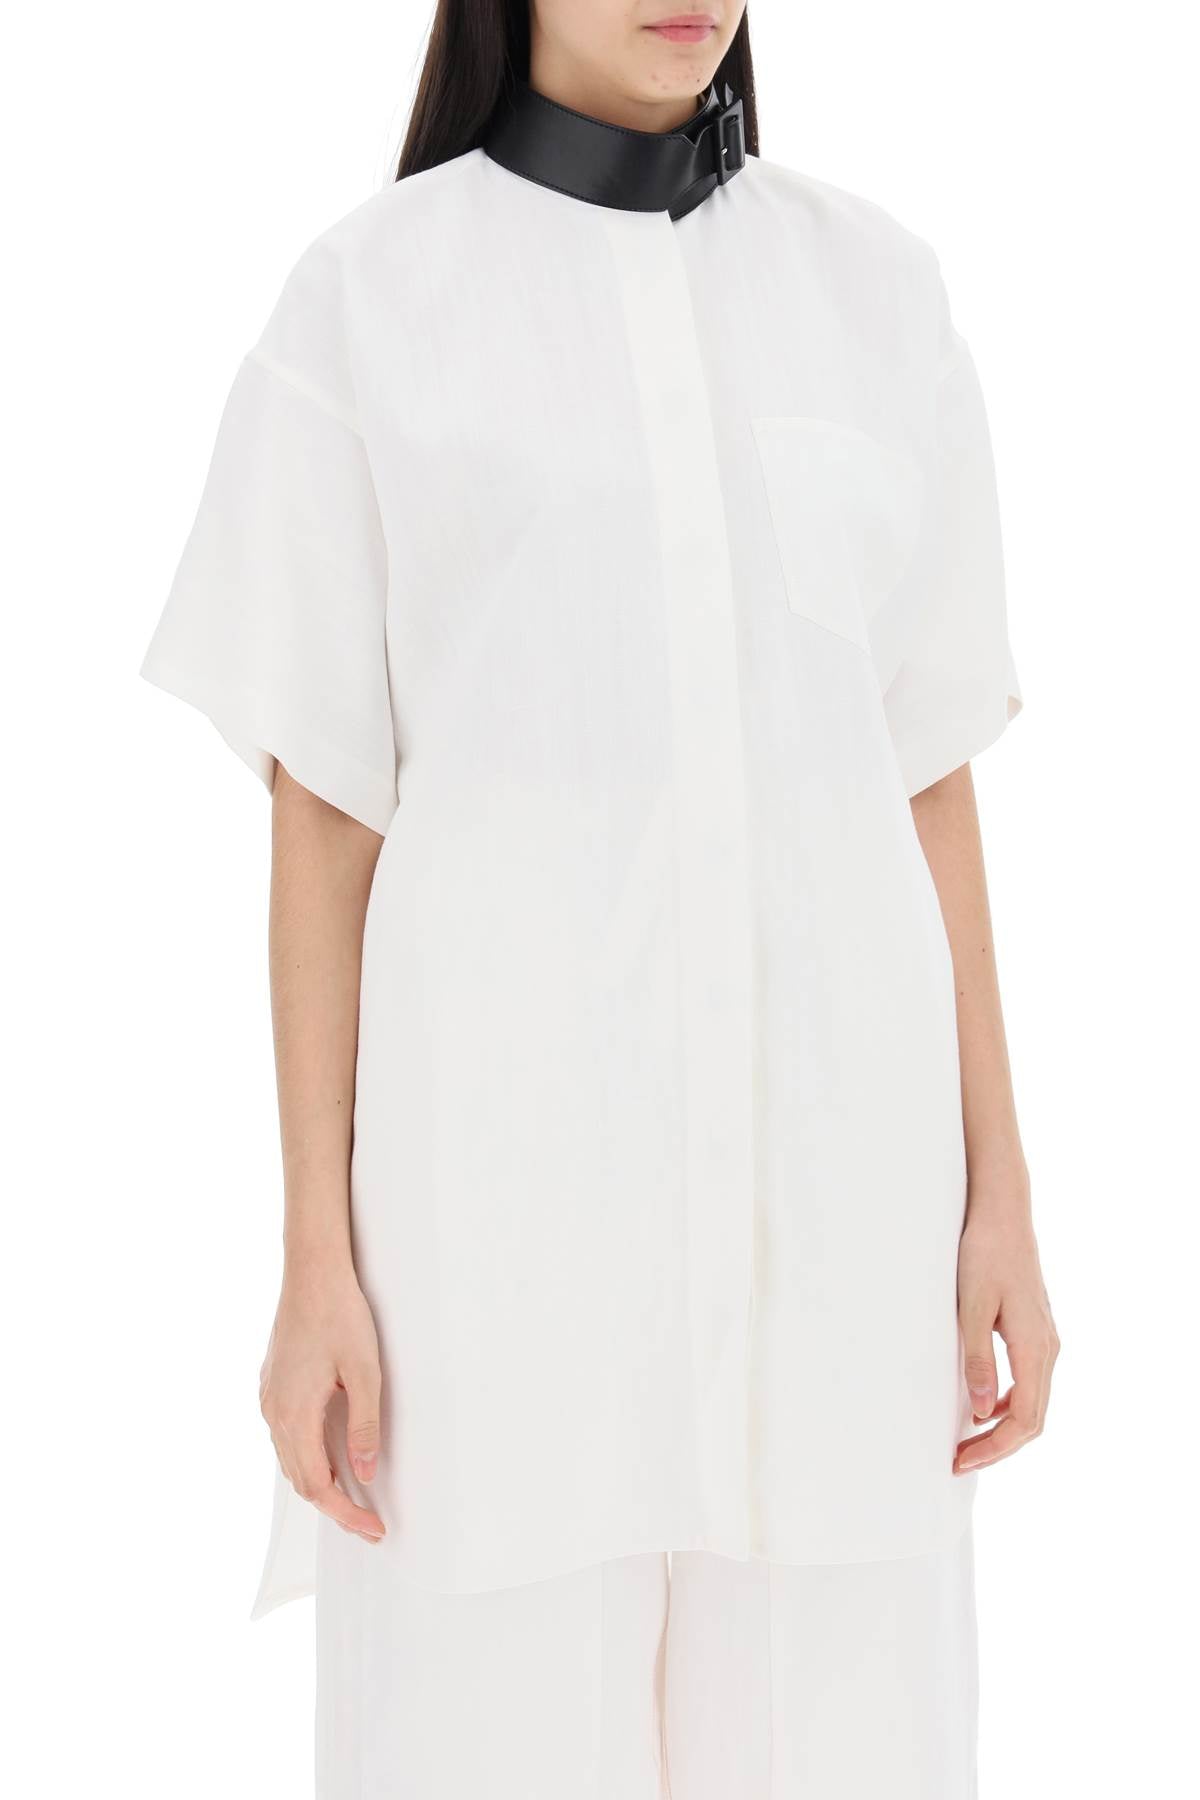 White Midi Chemisier Dress with Faux Leather Strap and Buckle